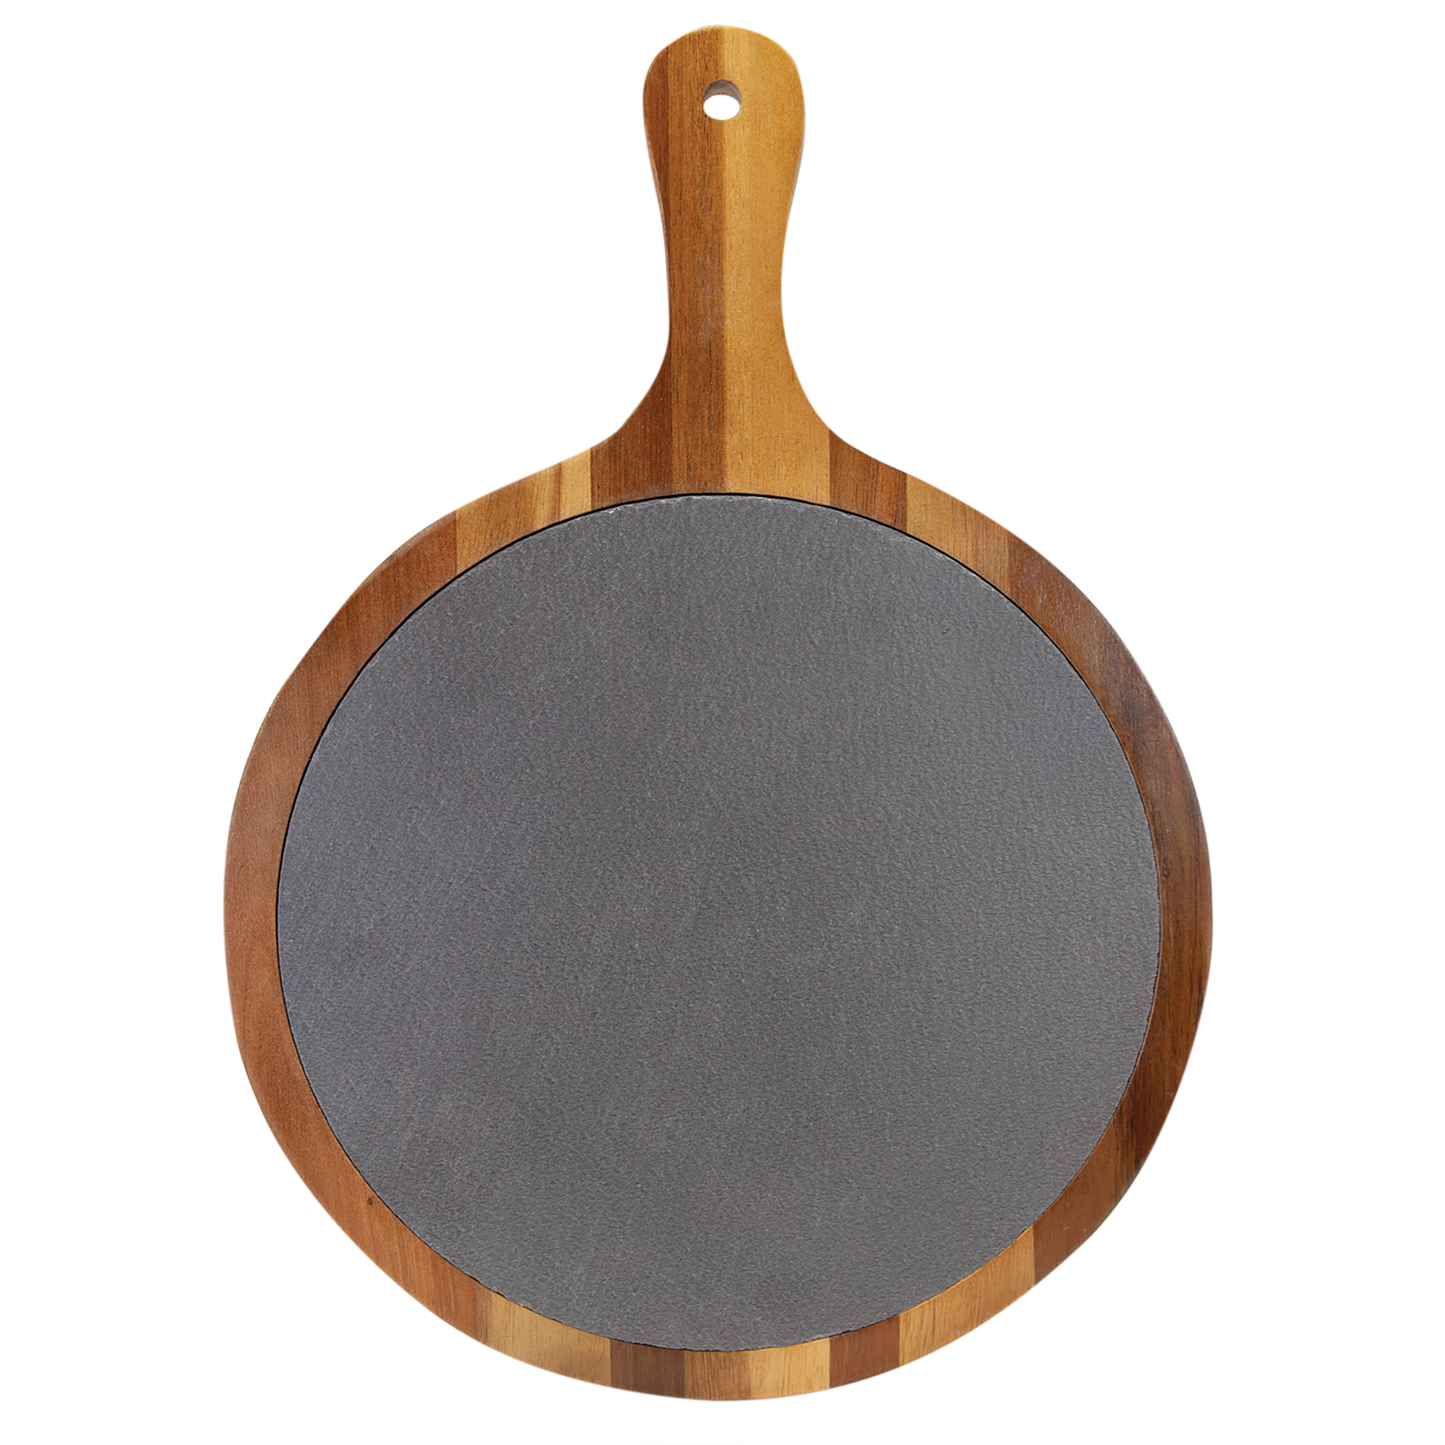 14 1/2" x 10 1/2" Round Acacia Wood/Slate Serving Board with Handle - Couple's Gift